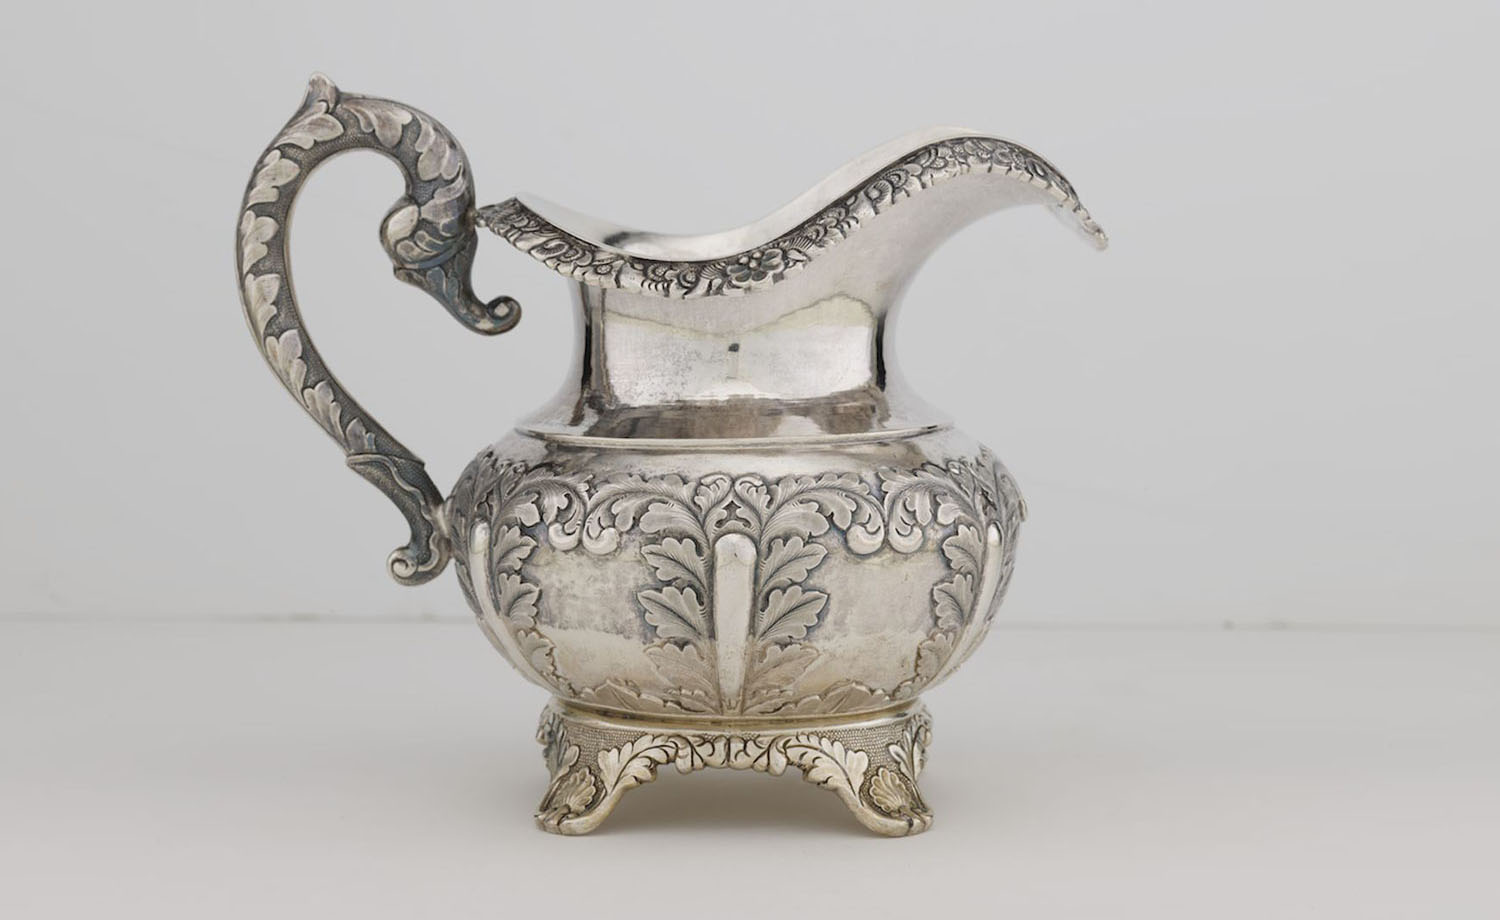 Silver cream jug decorated with acanthus leaf pattern<br> Cutshing, Canton<br>Mark of "CUT" and pseudo hallmarks